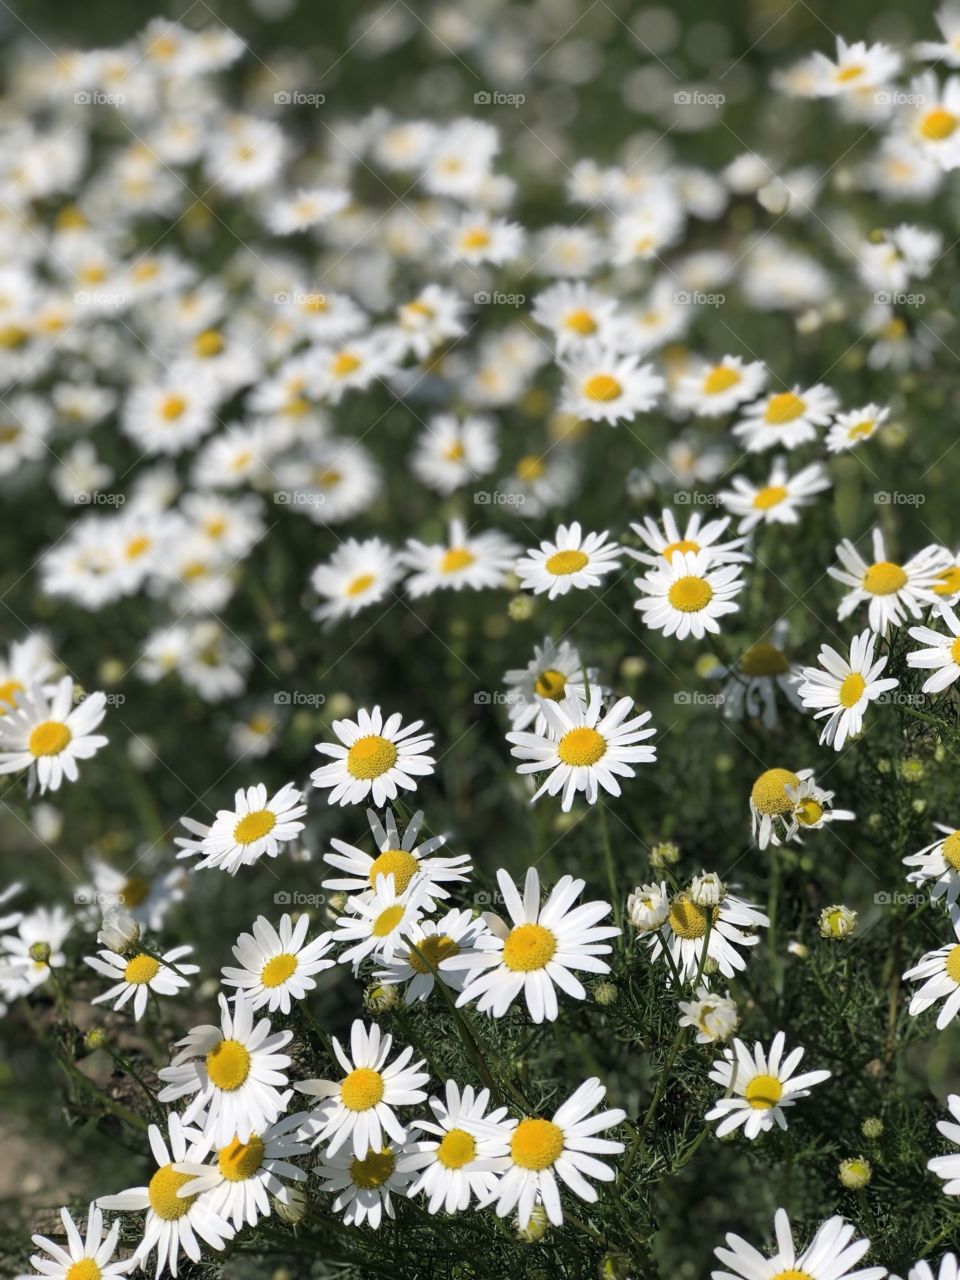 Don’t let anyone trample on your daisies. Not even you! 